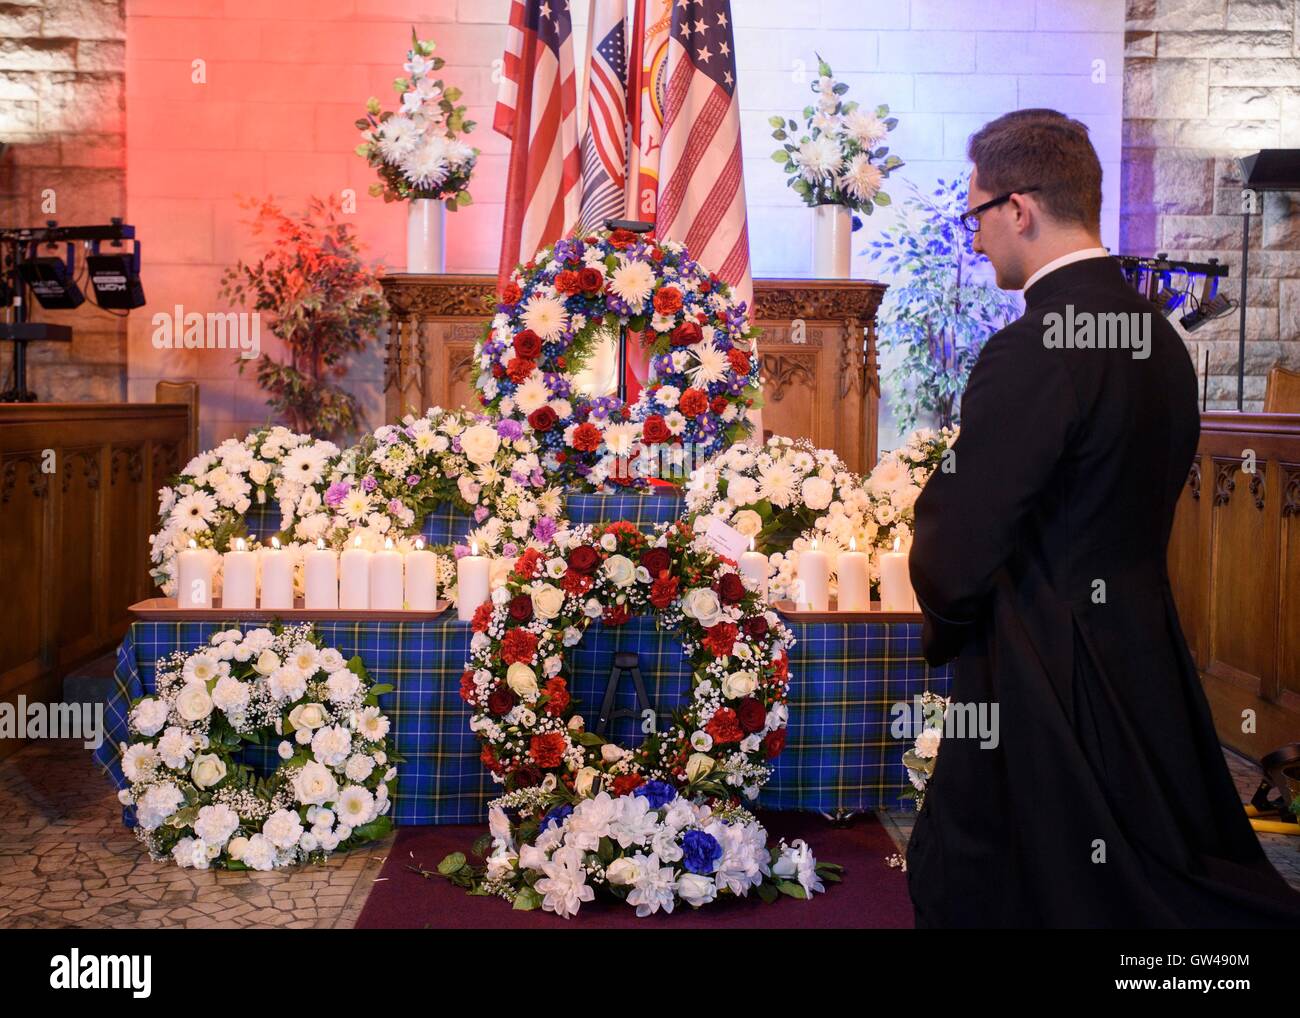 Polish Catholic Priest Maximillian MacAulay looks at the wreaths during a special memorial service to mark the 15th anniversary of 9/11 at Cathcart Old Parish Church, Glasgow. Stock Photo